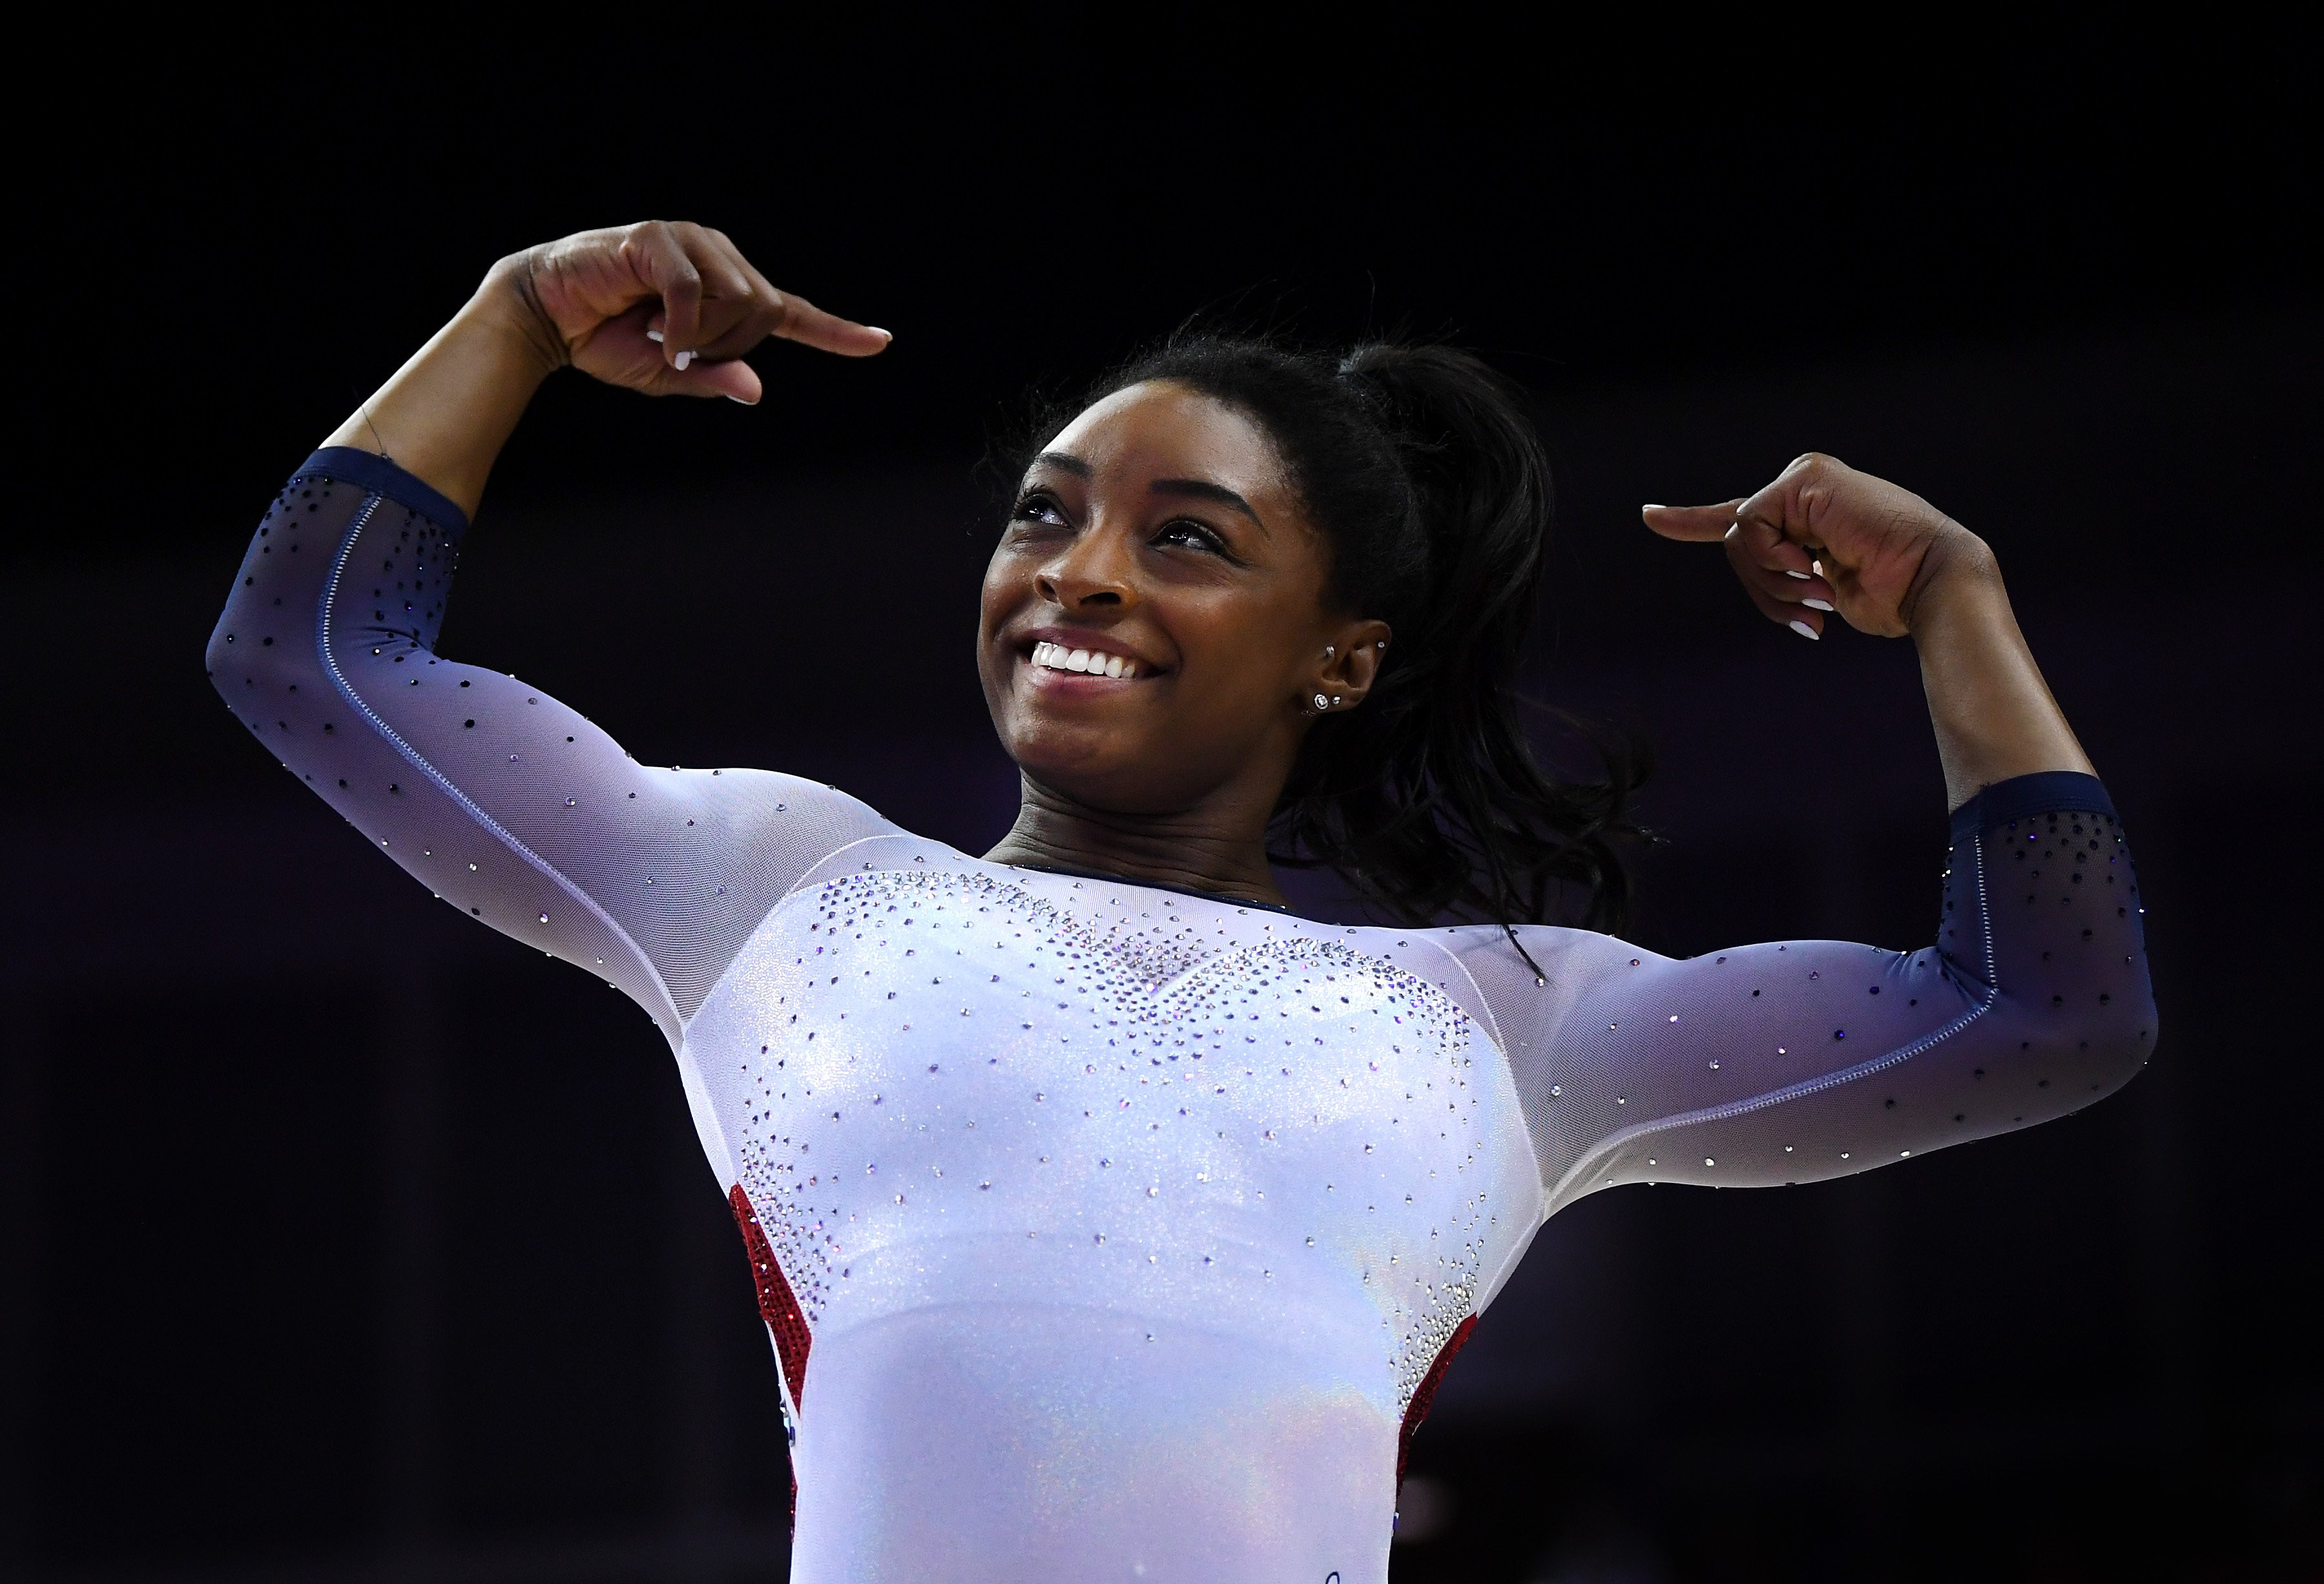 Simone Biles during her performance at the Superstars of Gymnastics at the O2 Arena on March 23, 2019 in London, England. | Photo: Getty Images